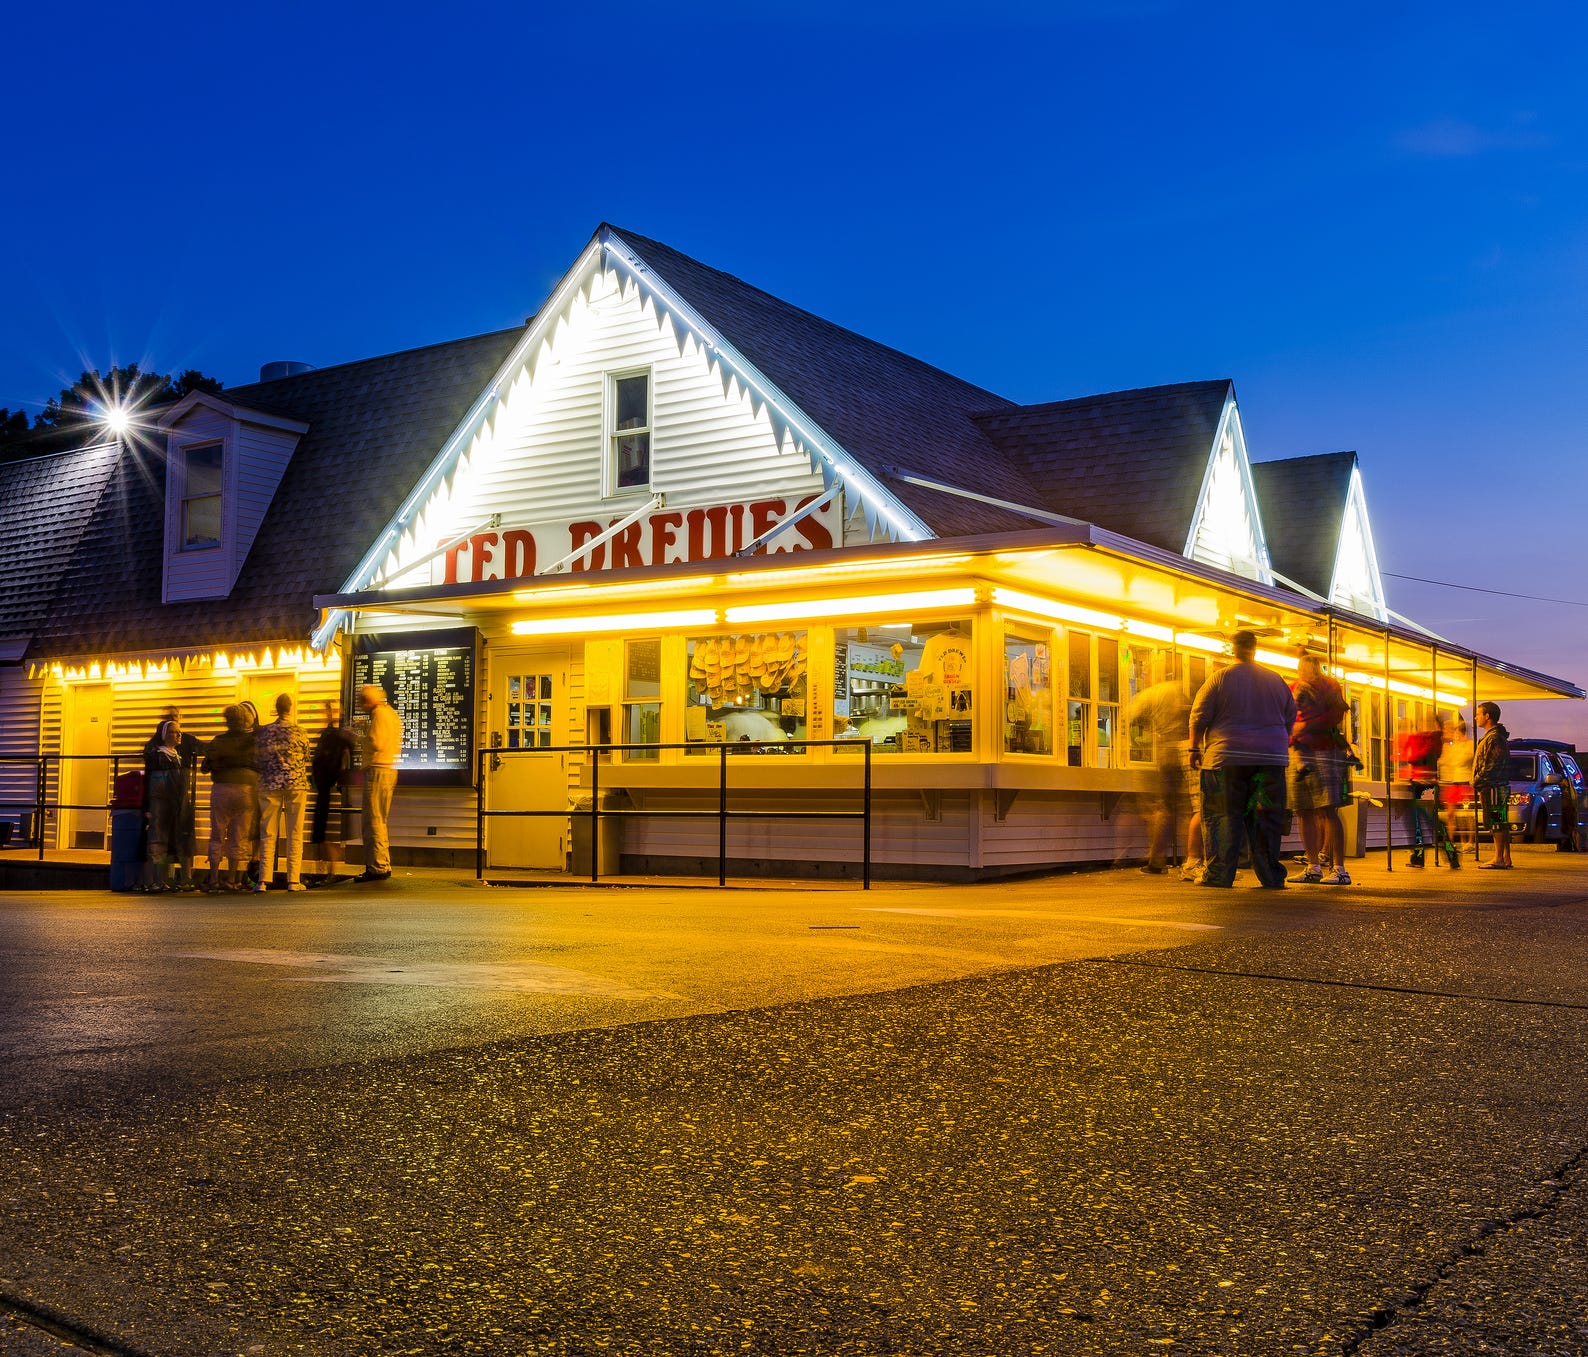 No trip down Route 66 through St. Louis is complete without a stop at Ted Drewes Frozen Custard.